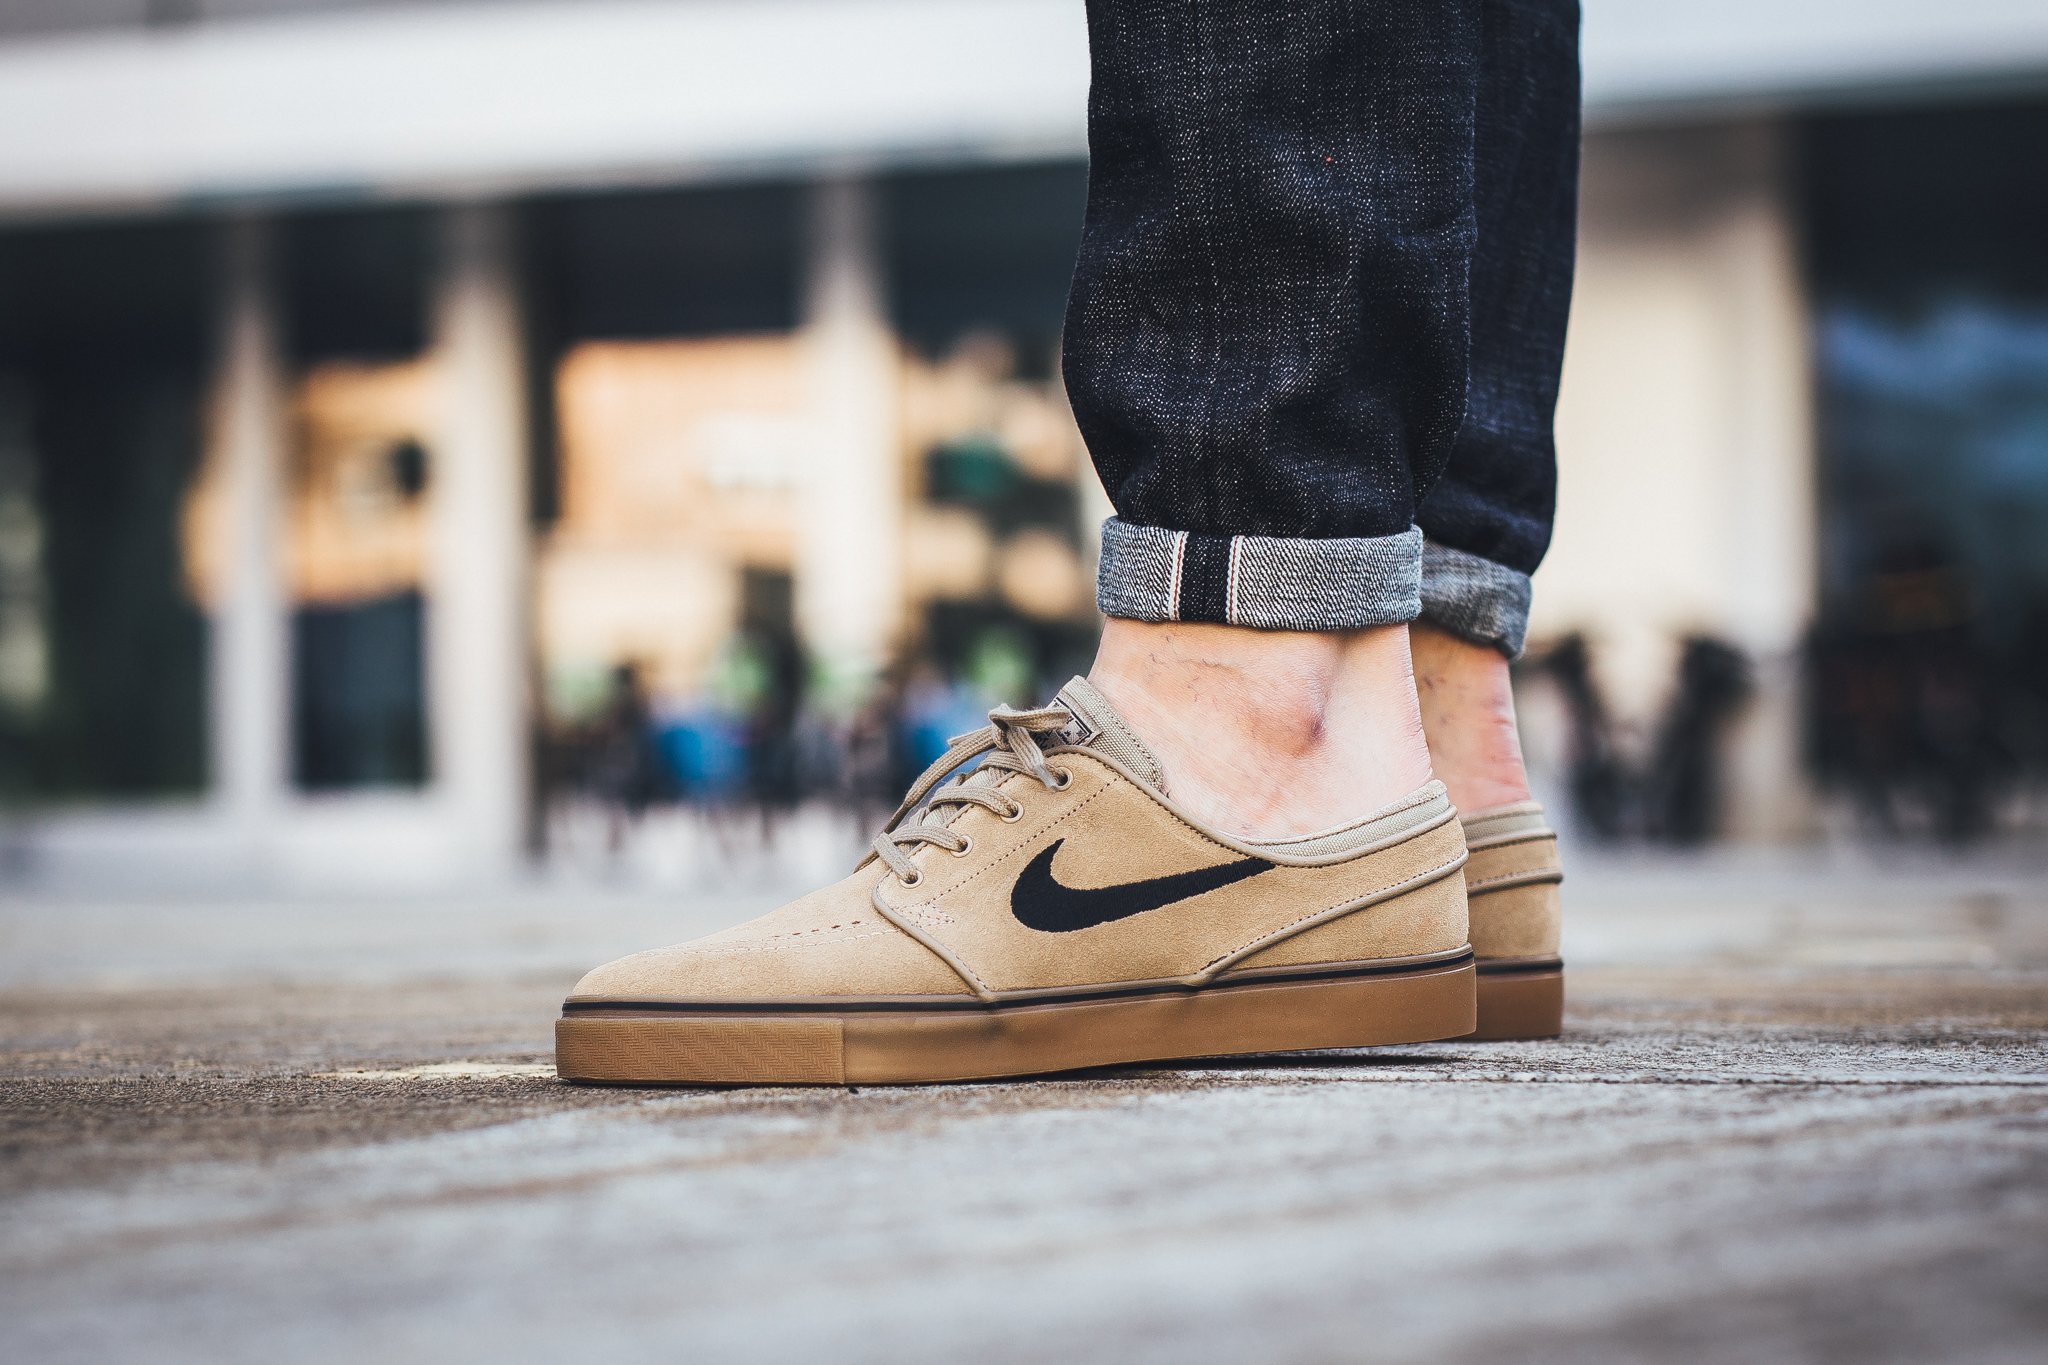 Titolo on Twitter: "Nike SB Zoom Stefan Janoski - Khaki/Black-Gum Light  Brown Available now at Titolo SHOP HERE https://t.co/liSUFxT0uv  https://t.co/jYmBFY4Nmh" / Twitter